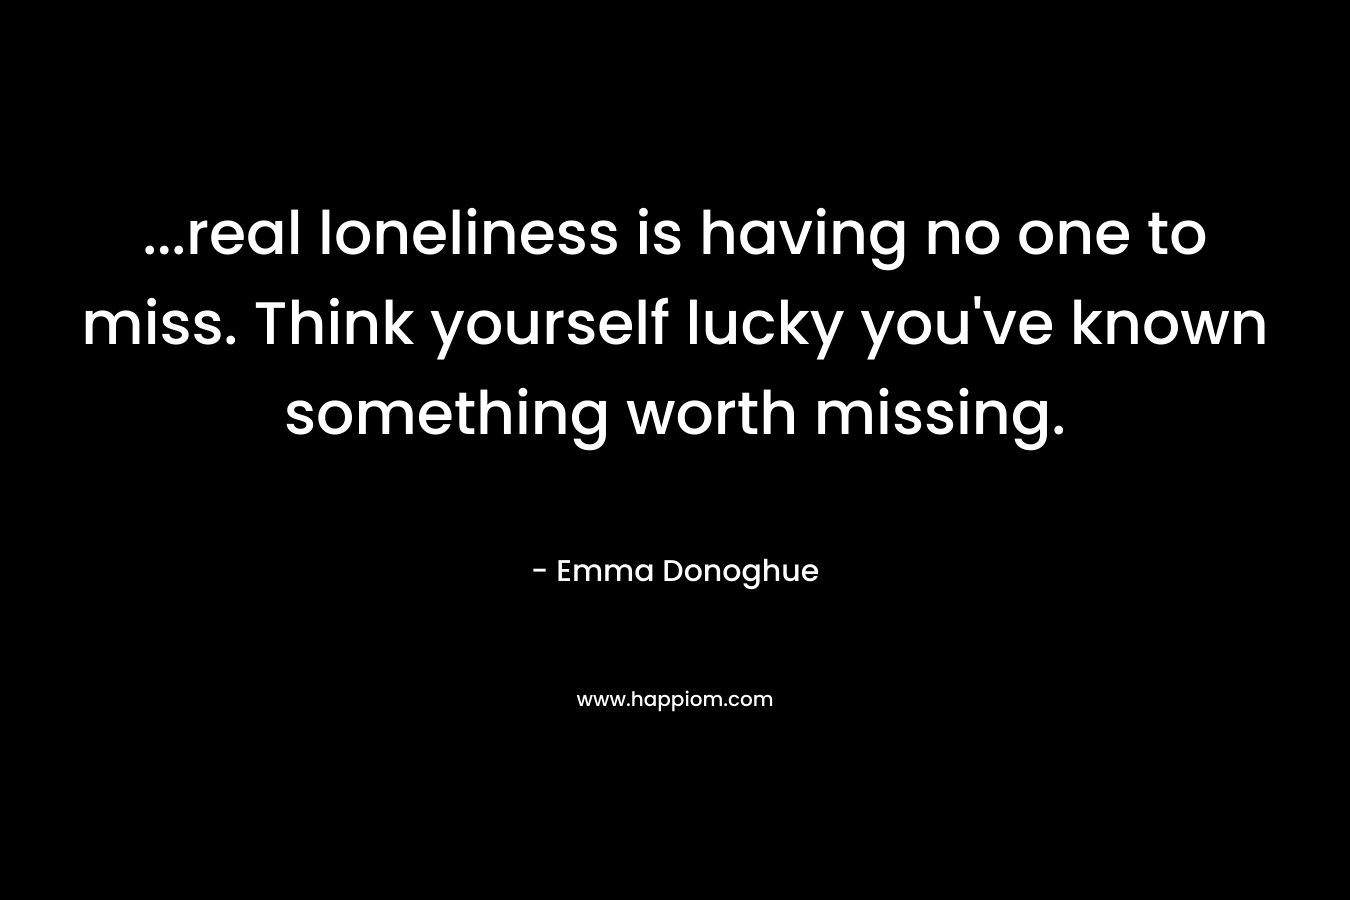 …real loneliness is having no one to miss. Think yourself lucky you’ve known something worth missing. – Emma Donoghue